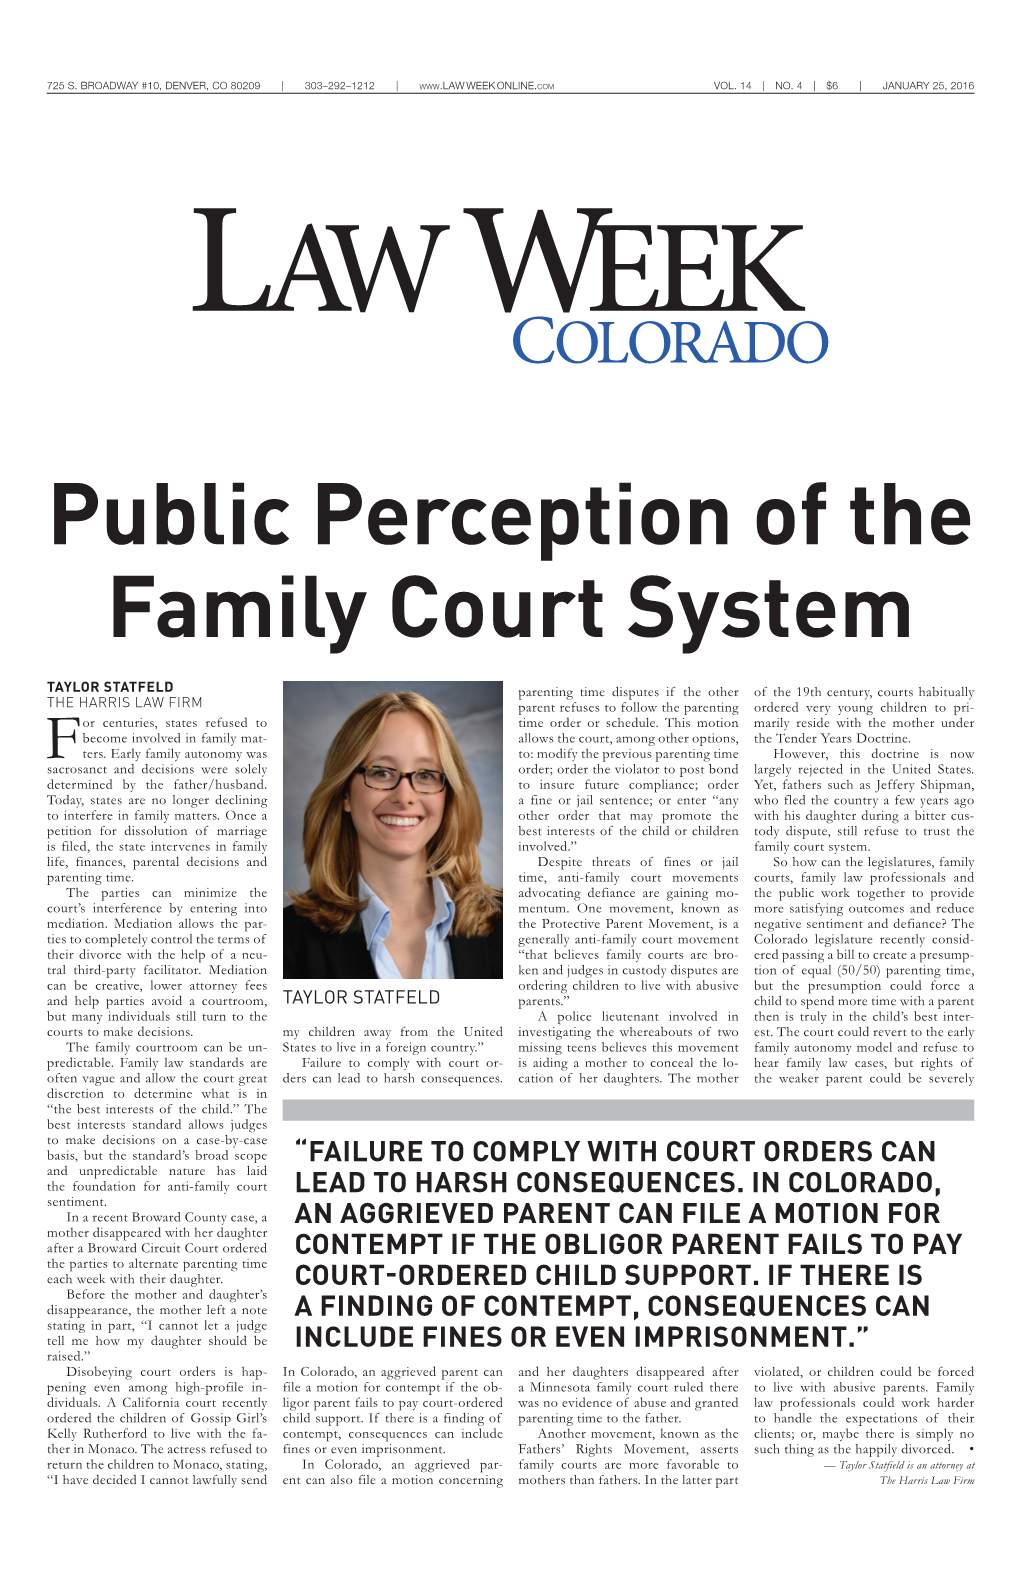 Public Perception of the Family Court System